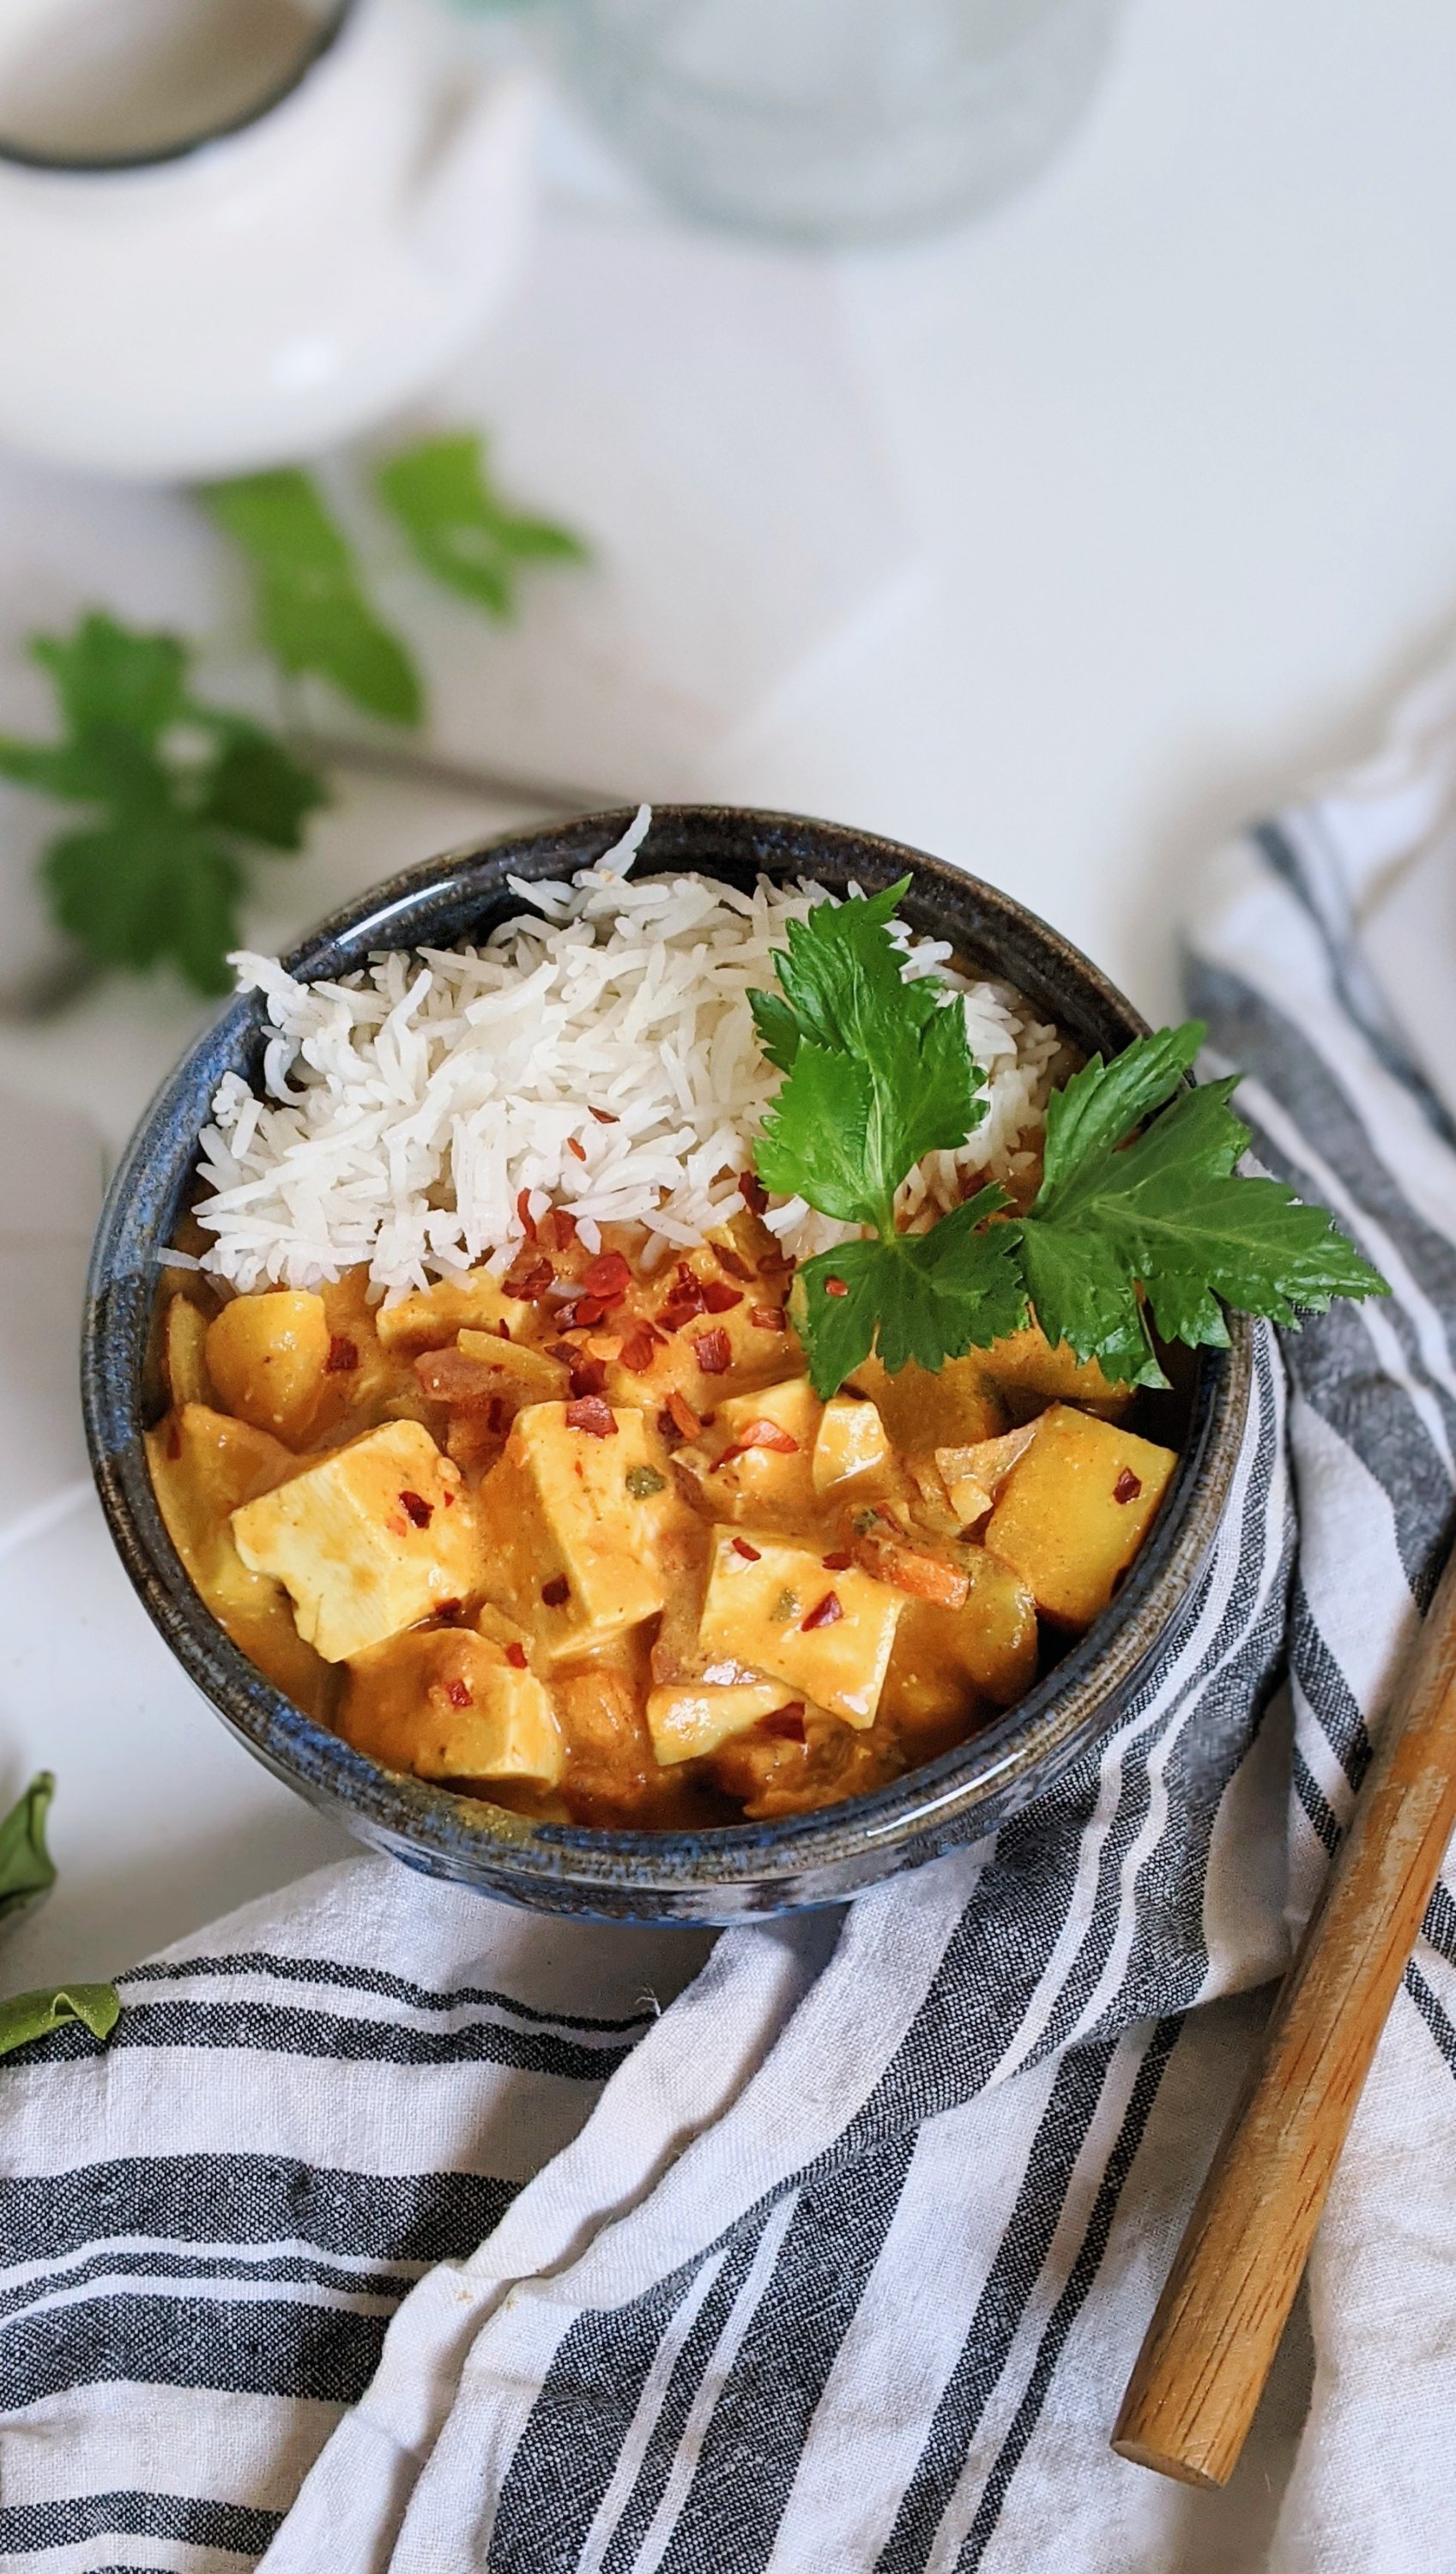 coconut milk curry with tofu recipe thai curries for dinner easy pantry staple dinner ideas vegan vegetarian meatless monday veganuary gluten free dairy free